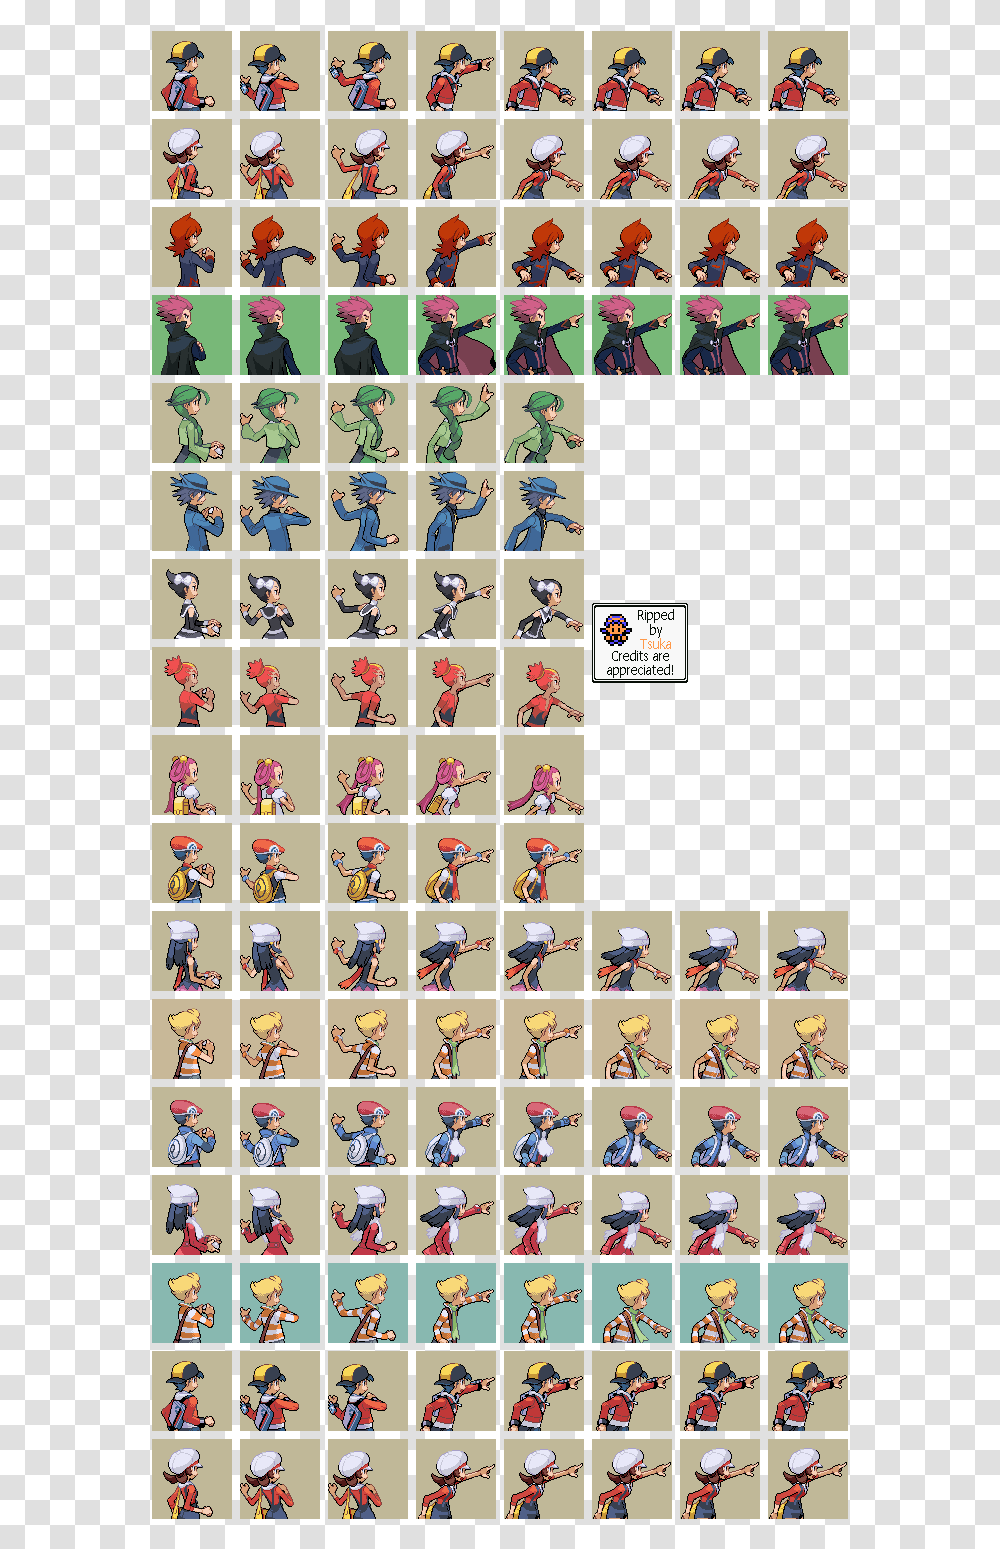 Trainers Backs Pokemon Gba Trainer Sprites, Rug, Collage, Poster, Advertisement Transparent Png